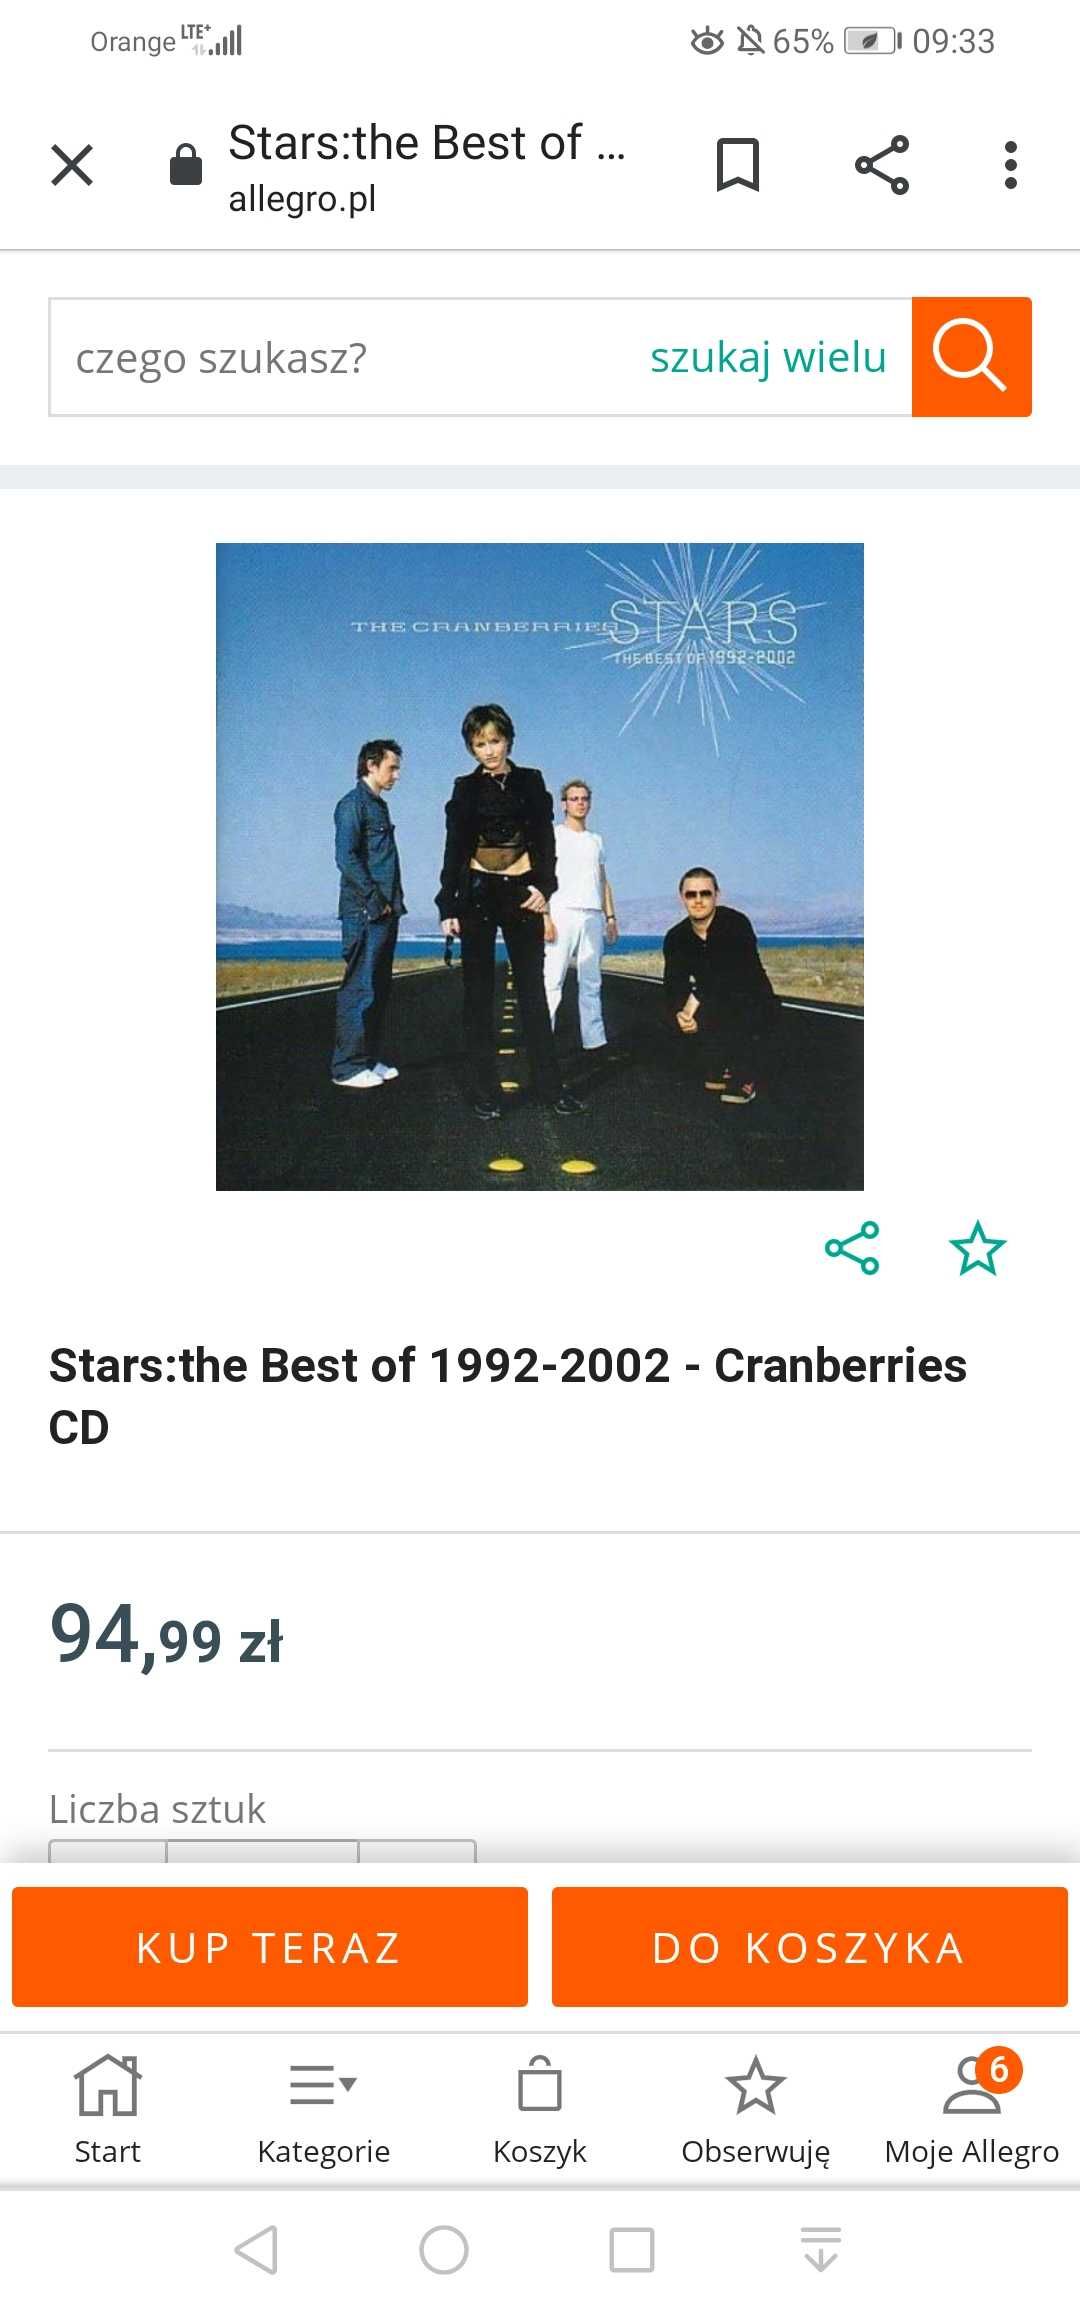 Cranberries - Stars the Best of